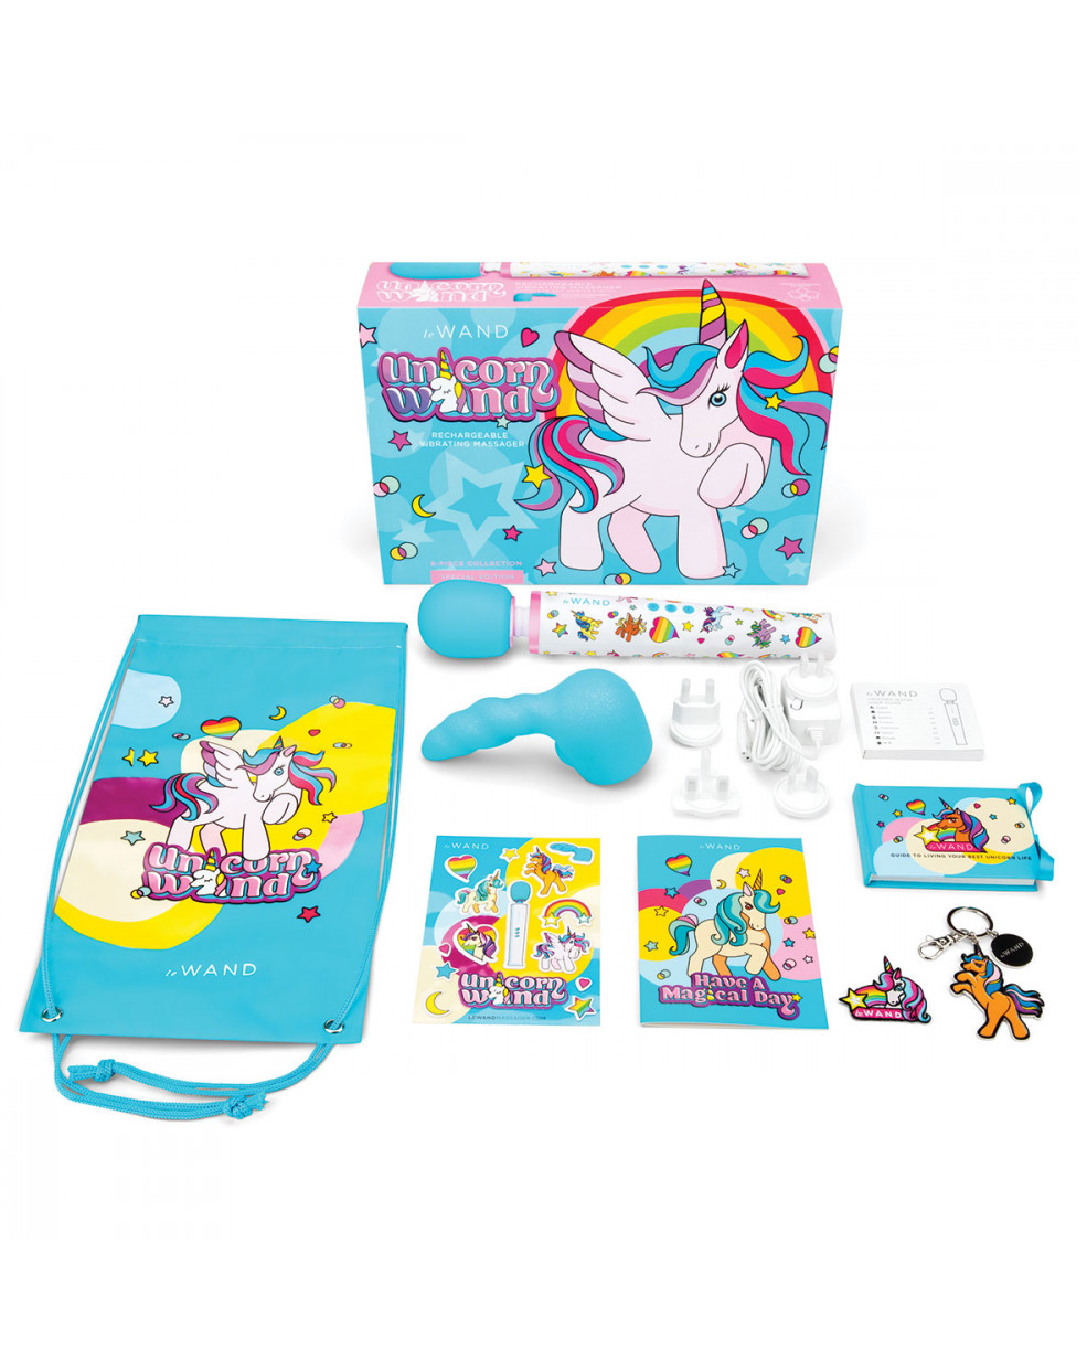 Le Wand Unicorn Wand 8 Piece Set with unicorn patterned wand, drawstring bag, attachment, accessories, key chain, book